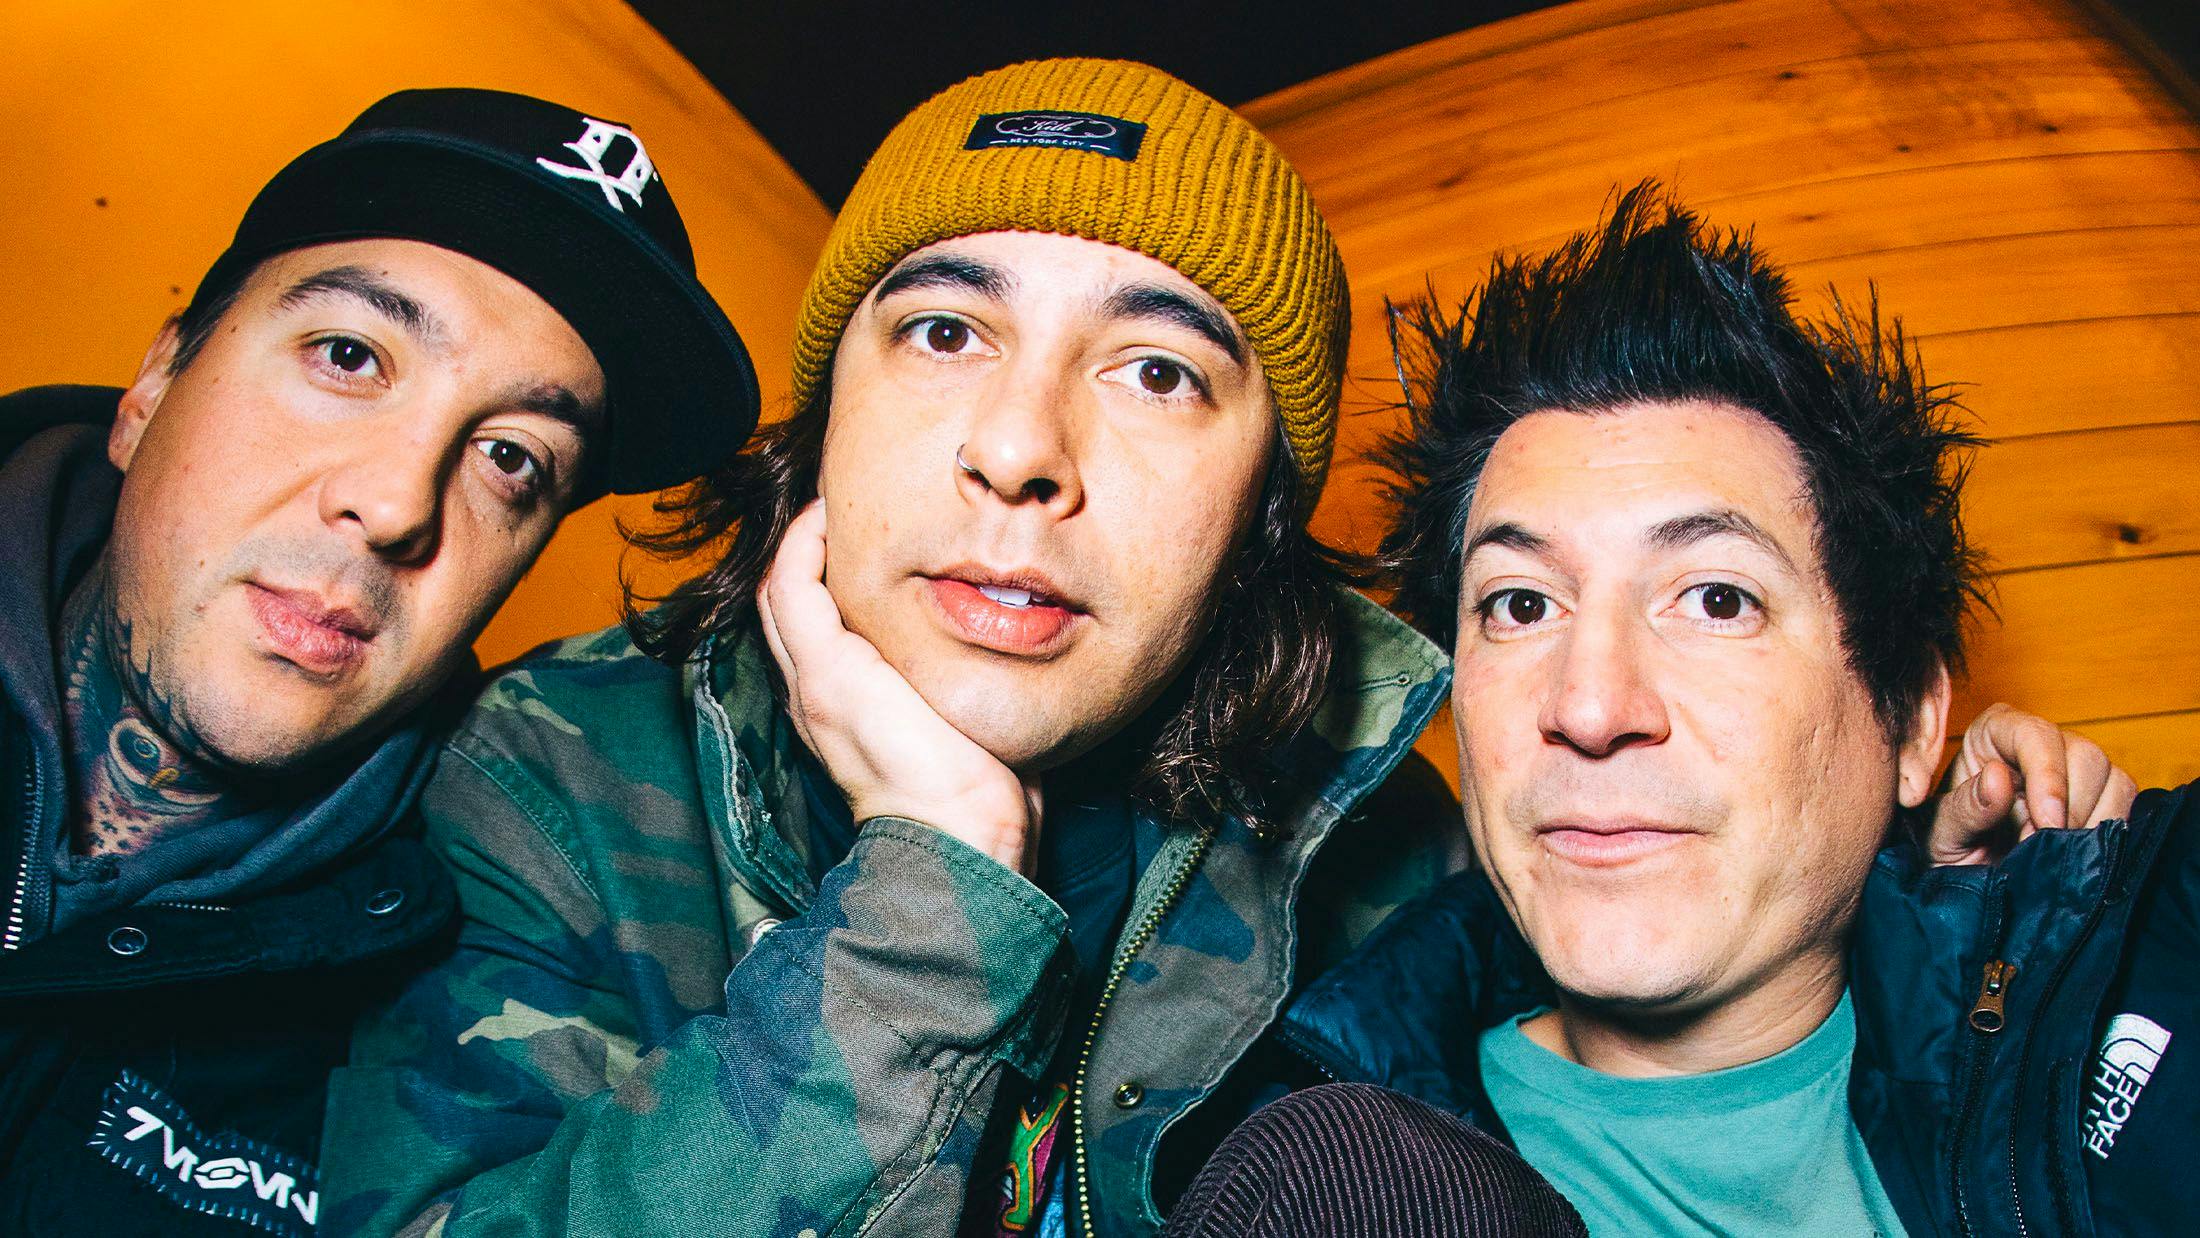 Pierce The Veil: “We’ve built this whole world where we can do anything creatively, and it’s so satisfying and comforting”